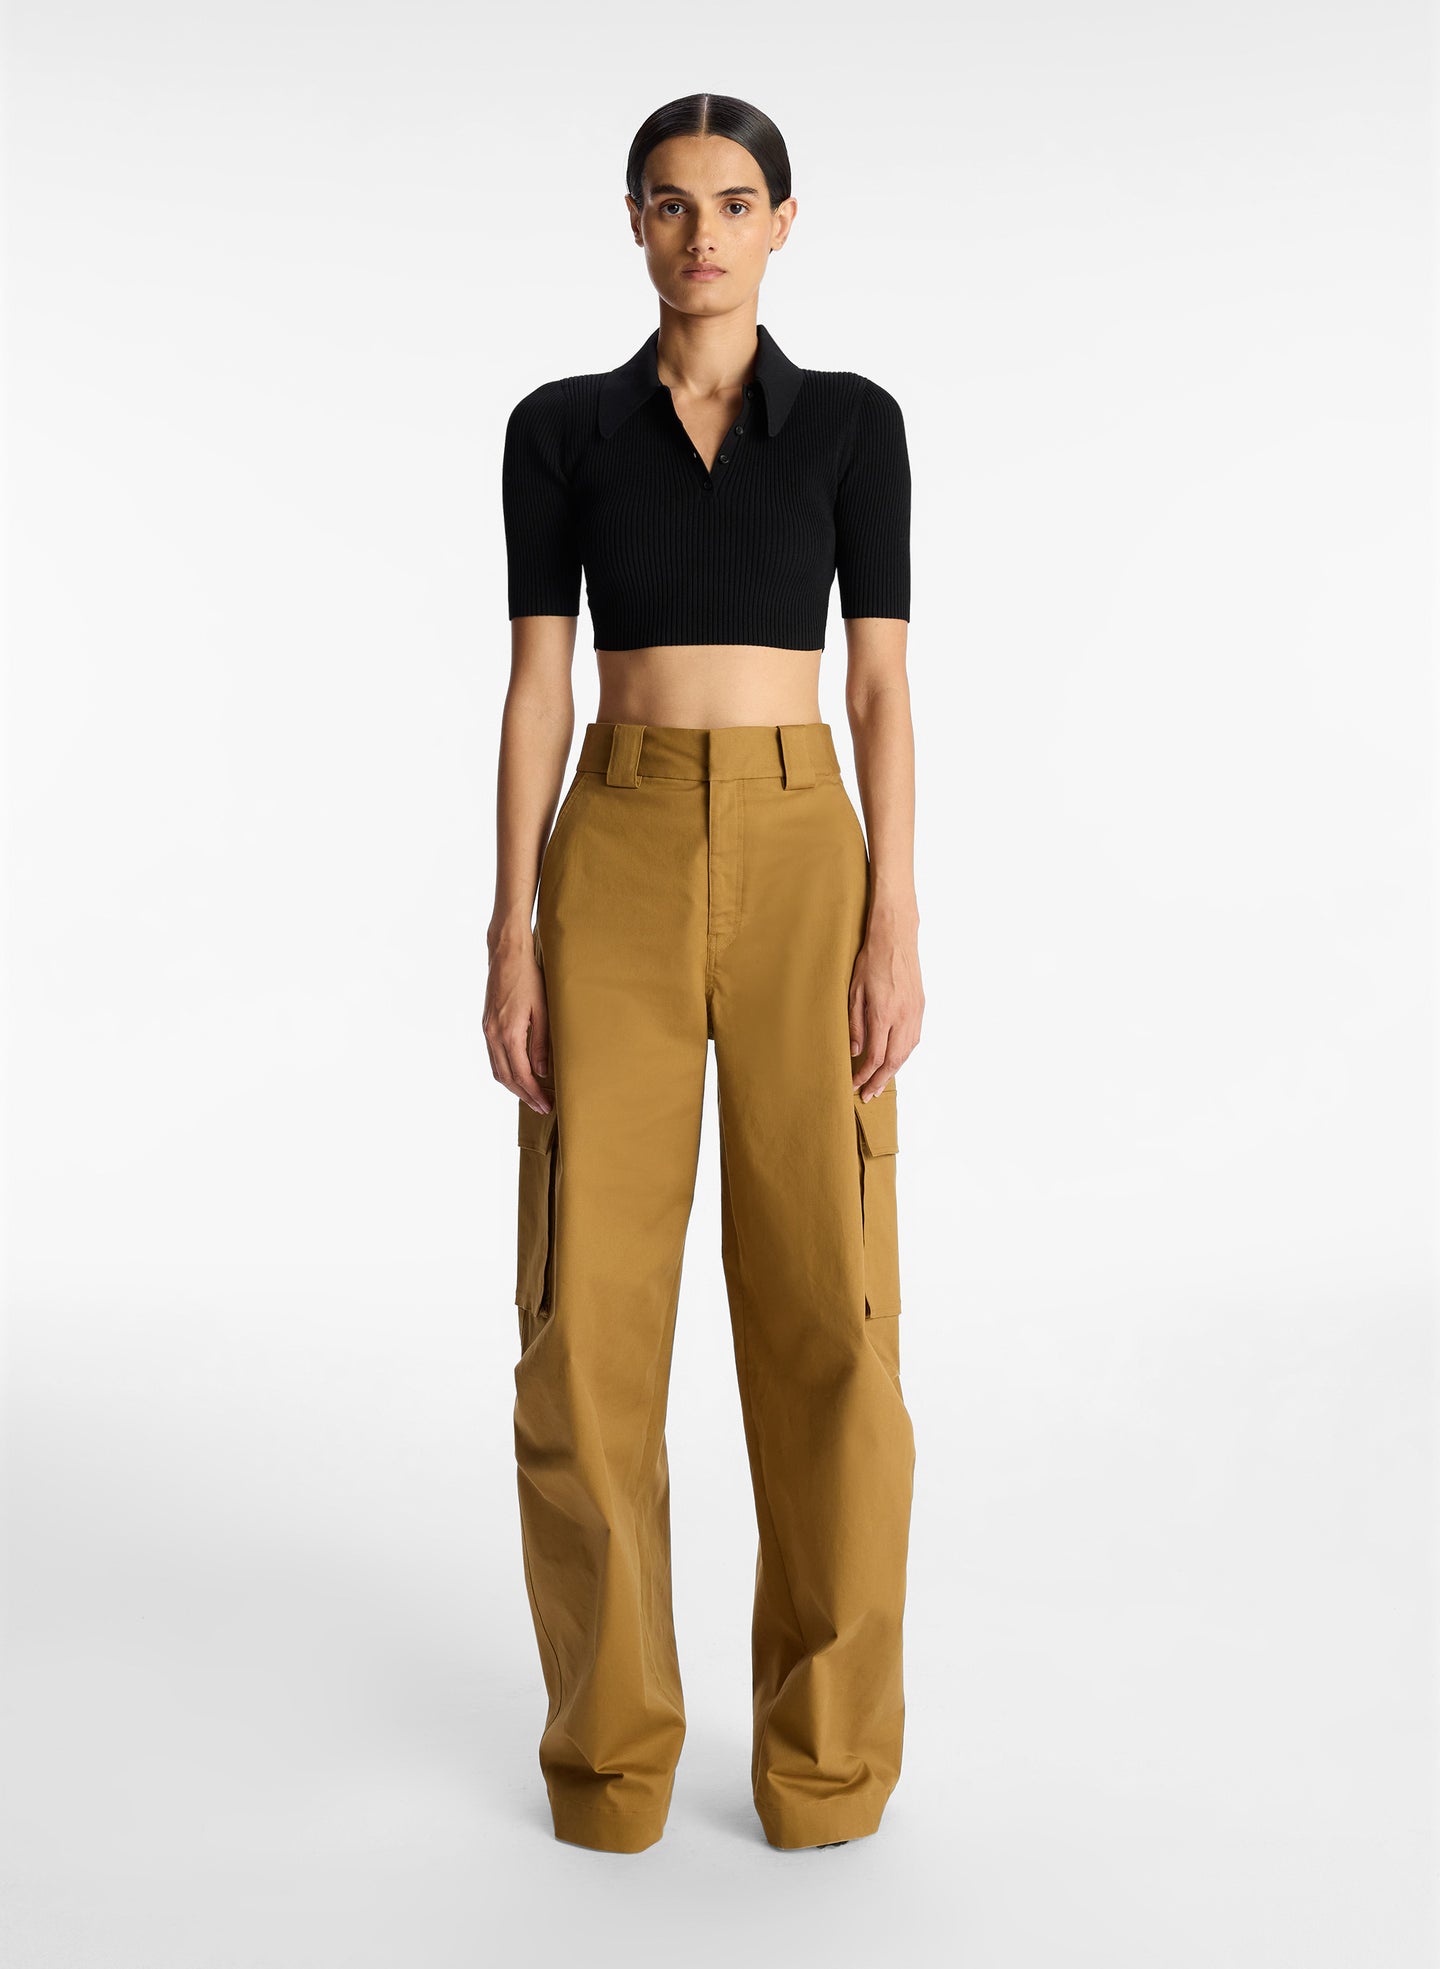 front view of woman wearing black cropped collared knit shirt and tan cargo pants